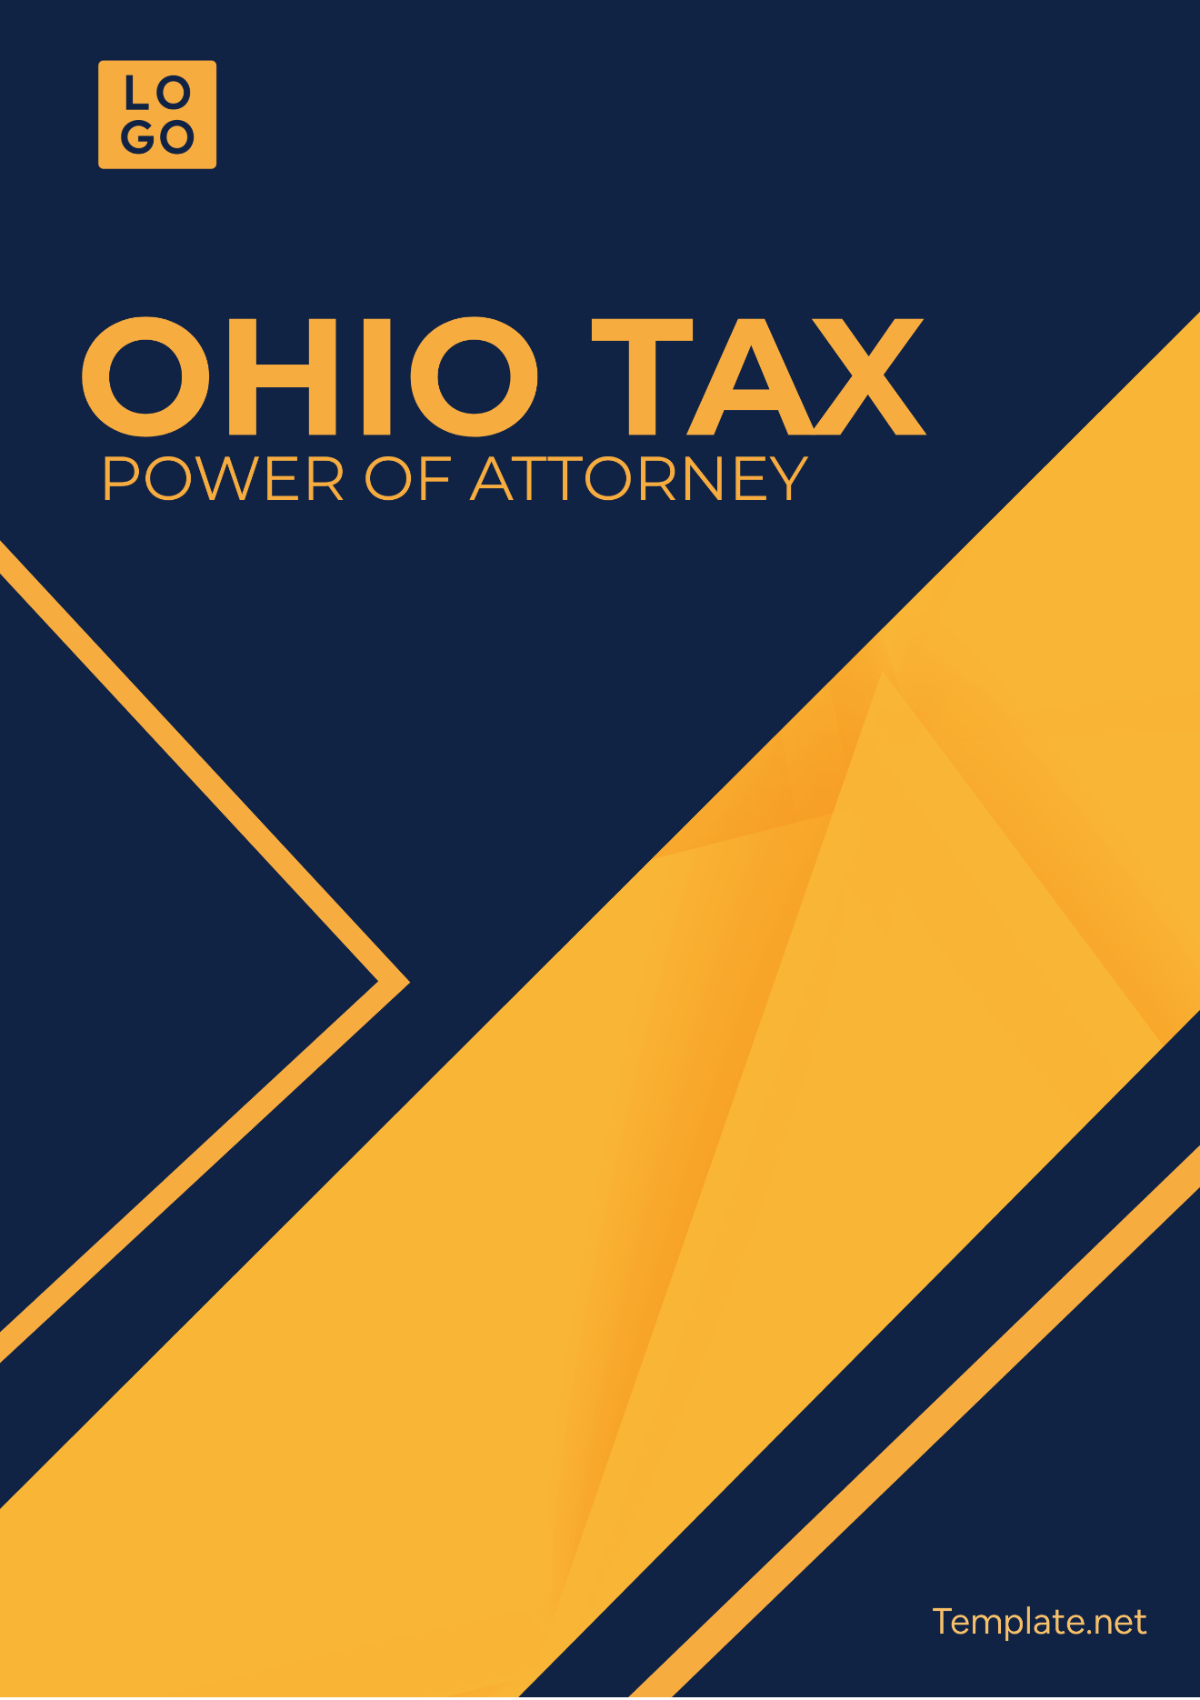 Free Ohio Tax Power of Attorney Template